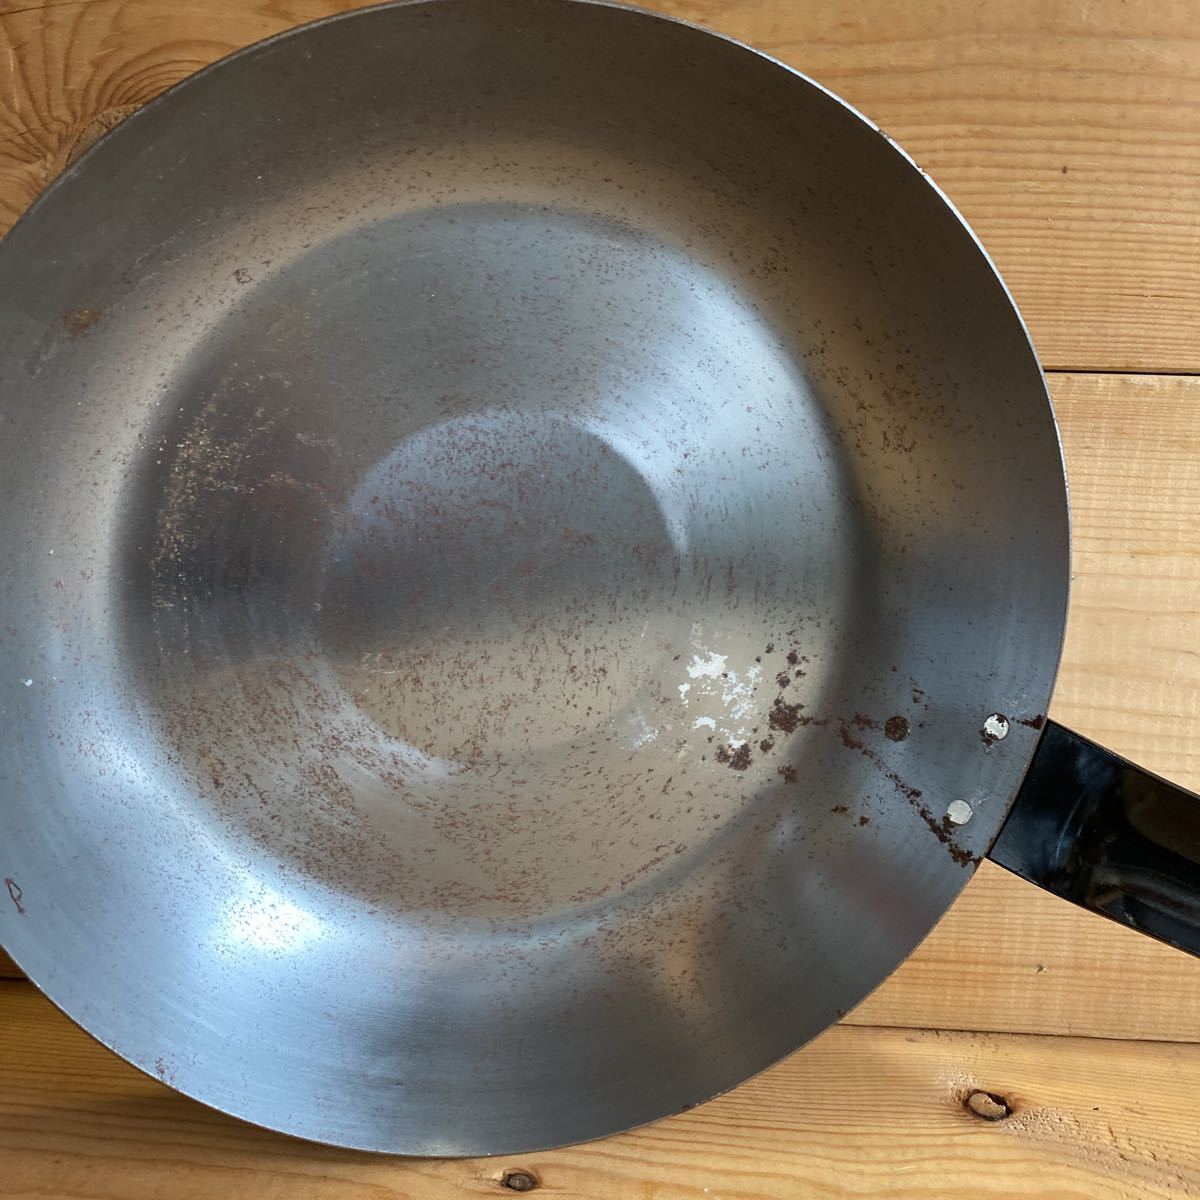  iron fry pan She's person g shining iron strike genuine article 32cm unused Pro use this only special price next times price return 